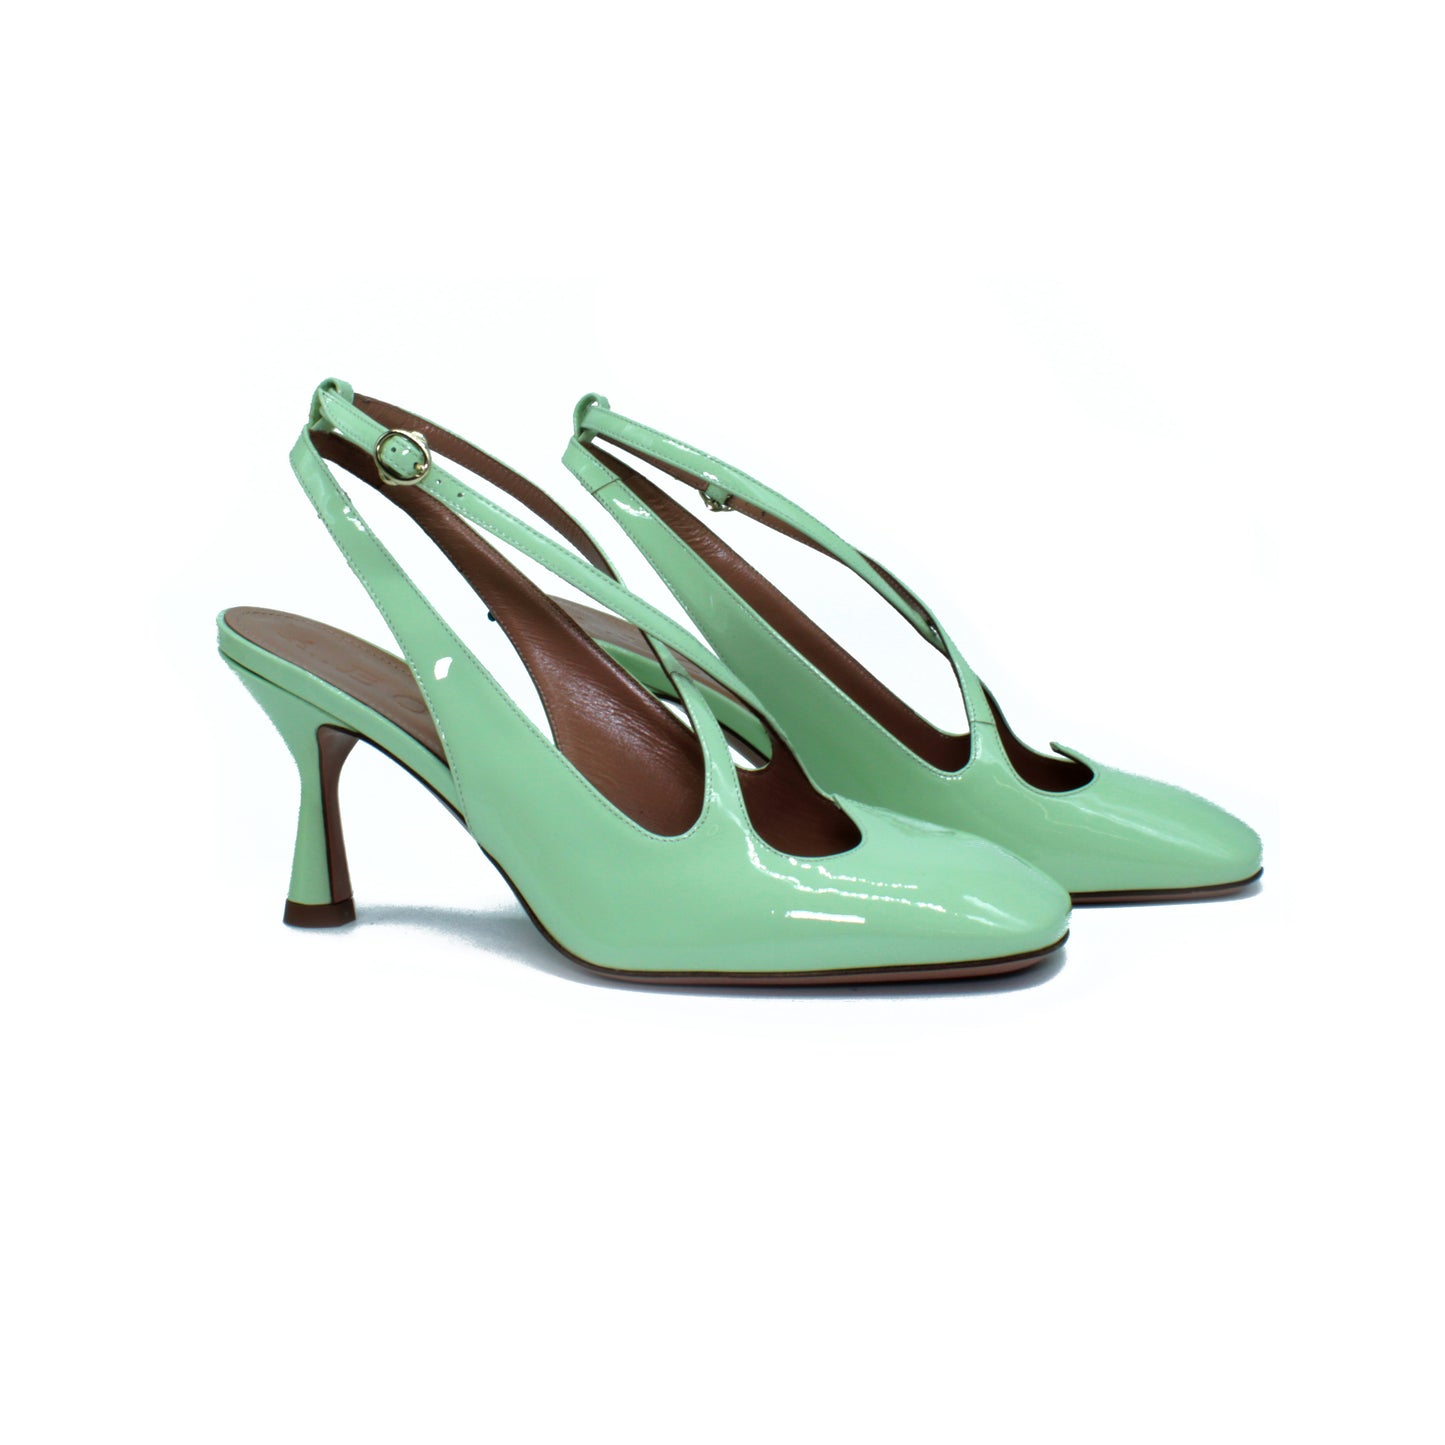 Sling Back Two for Love in ambrosia-colored patent leather